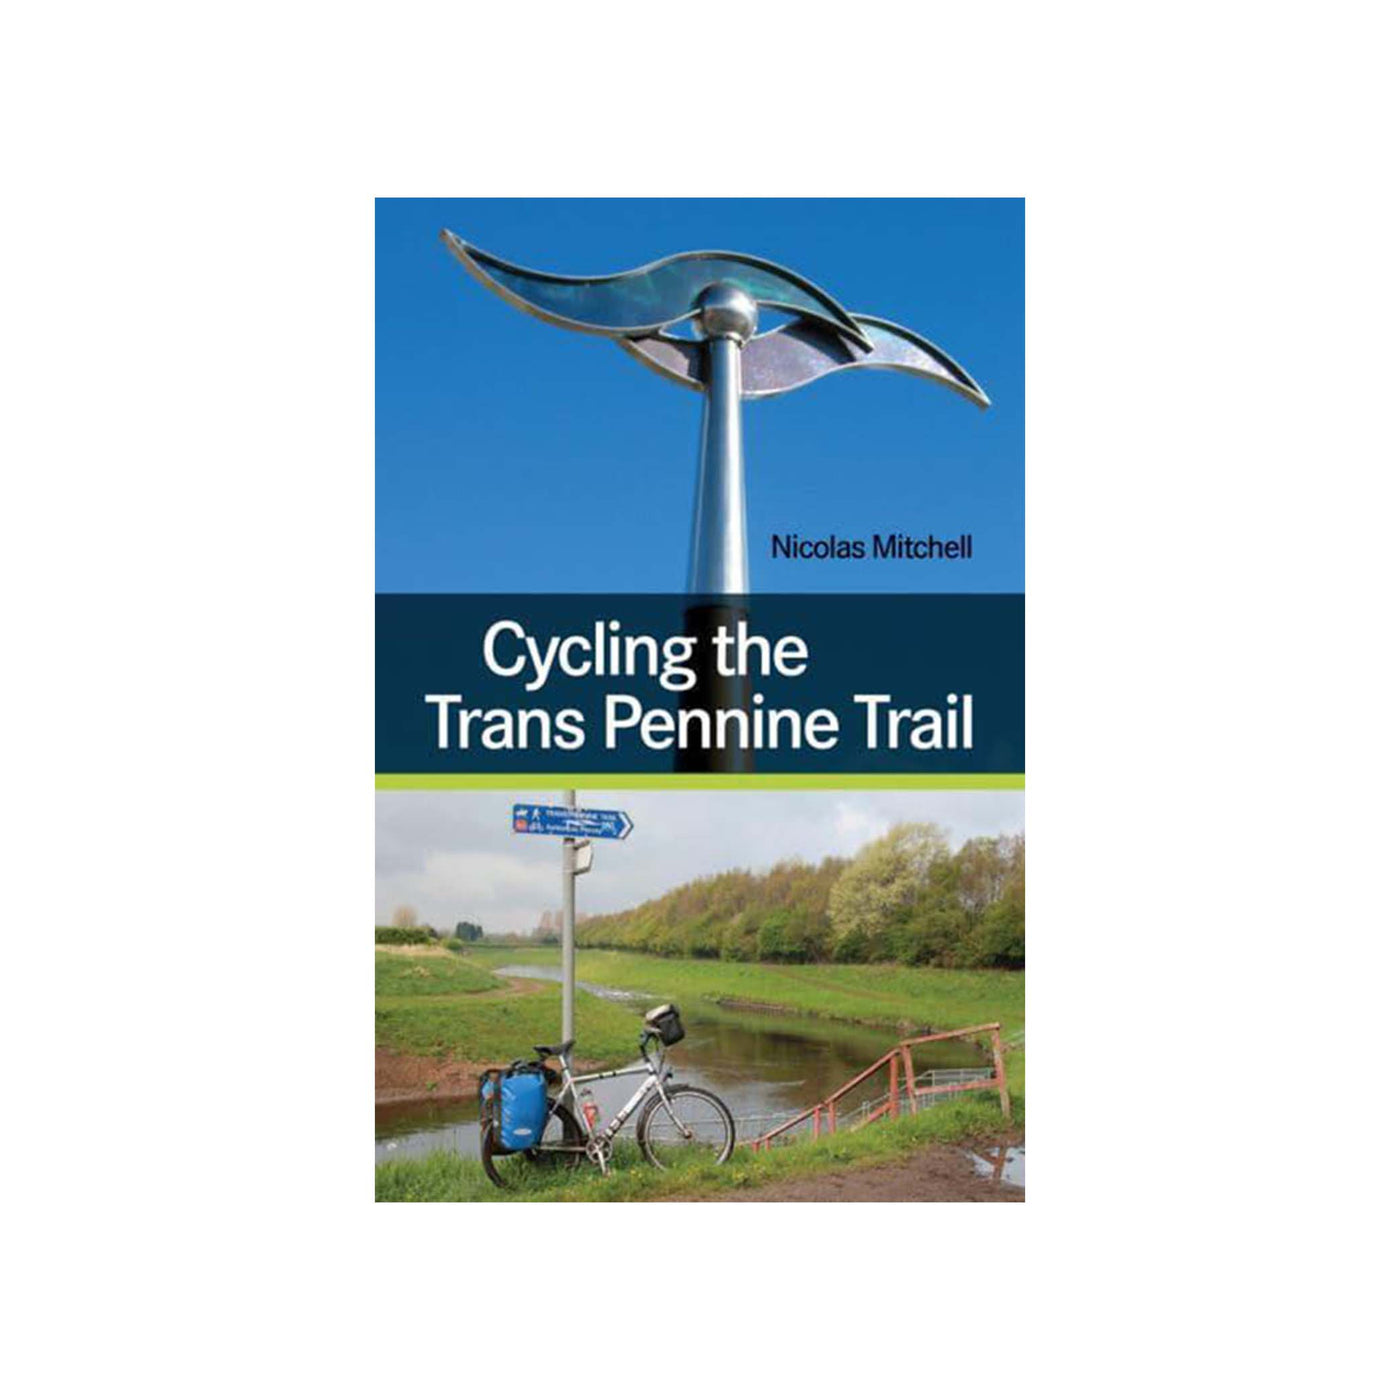 Cycling the Trans Pennine Trail guidebook. Author: Nicholas Mitchell